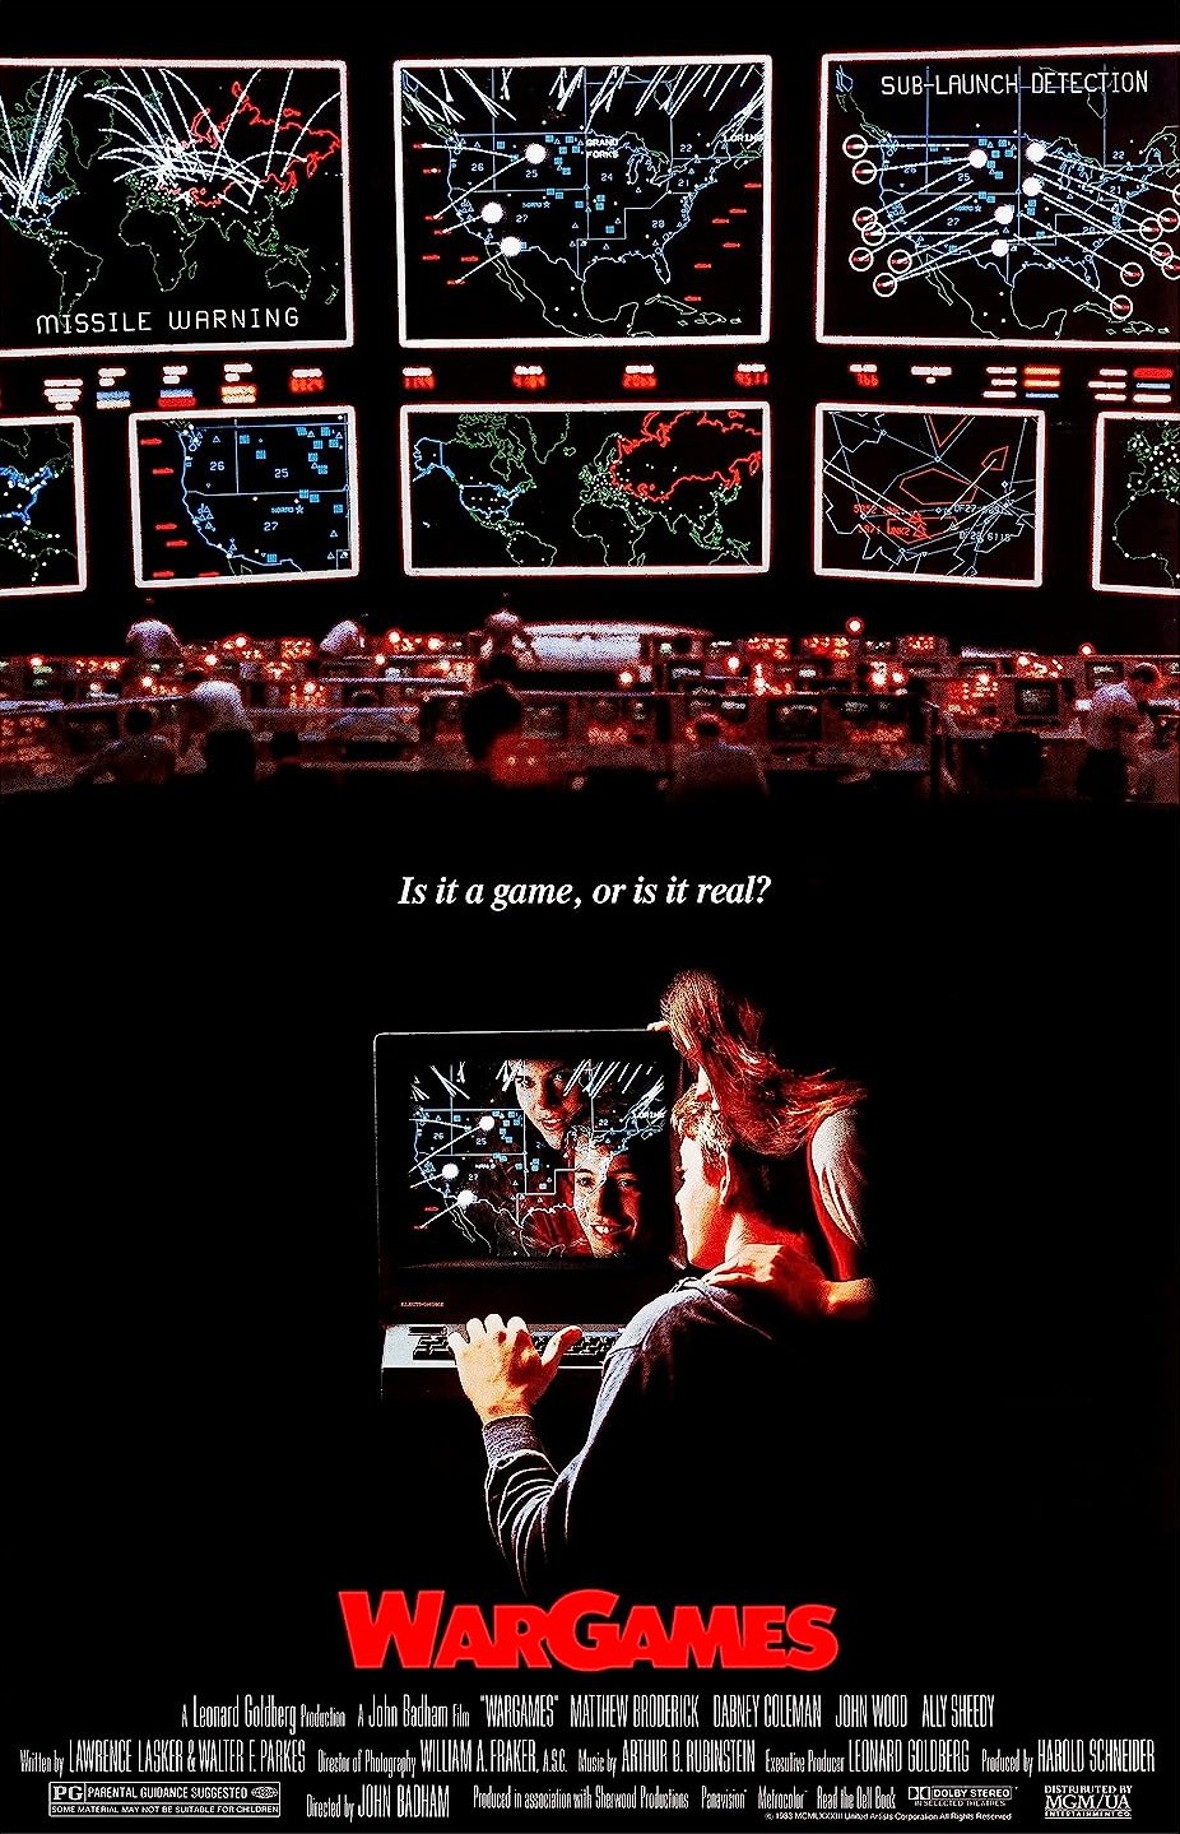 Image of Wargames official poster.